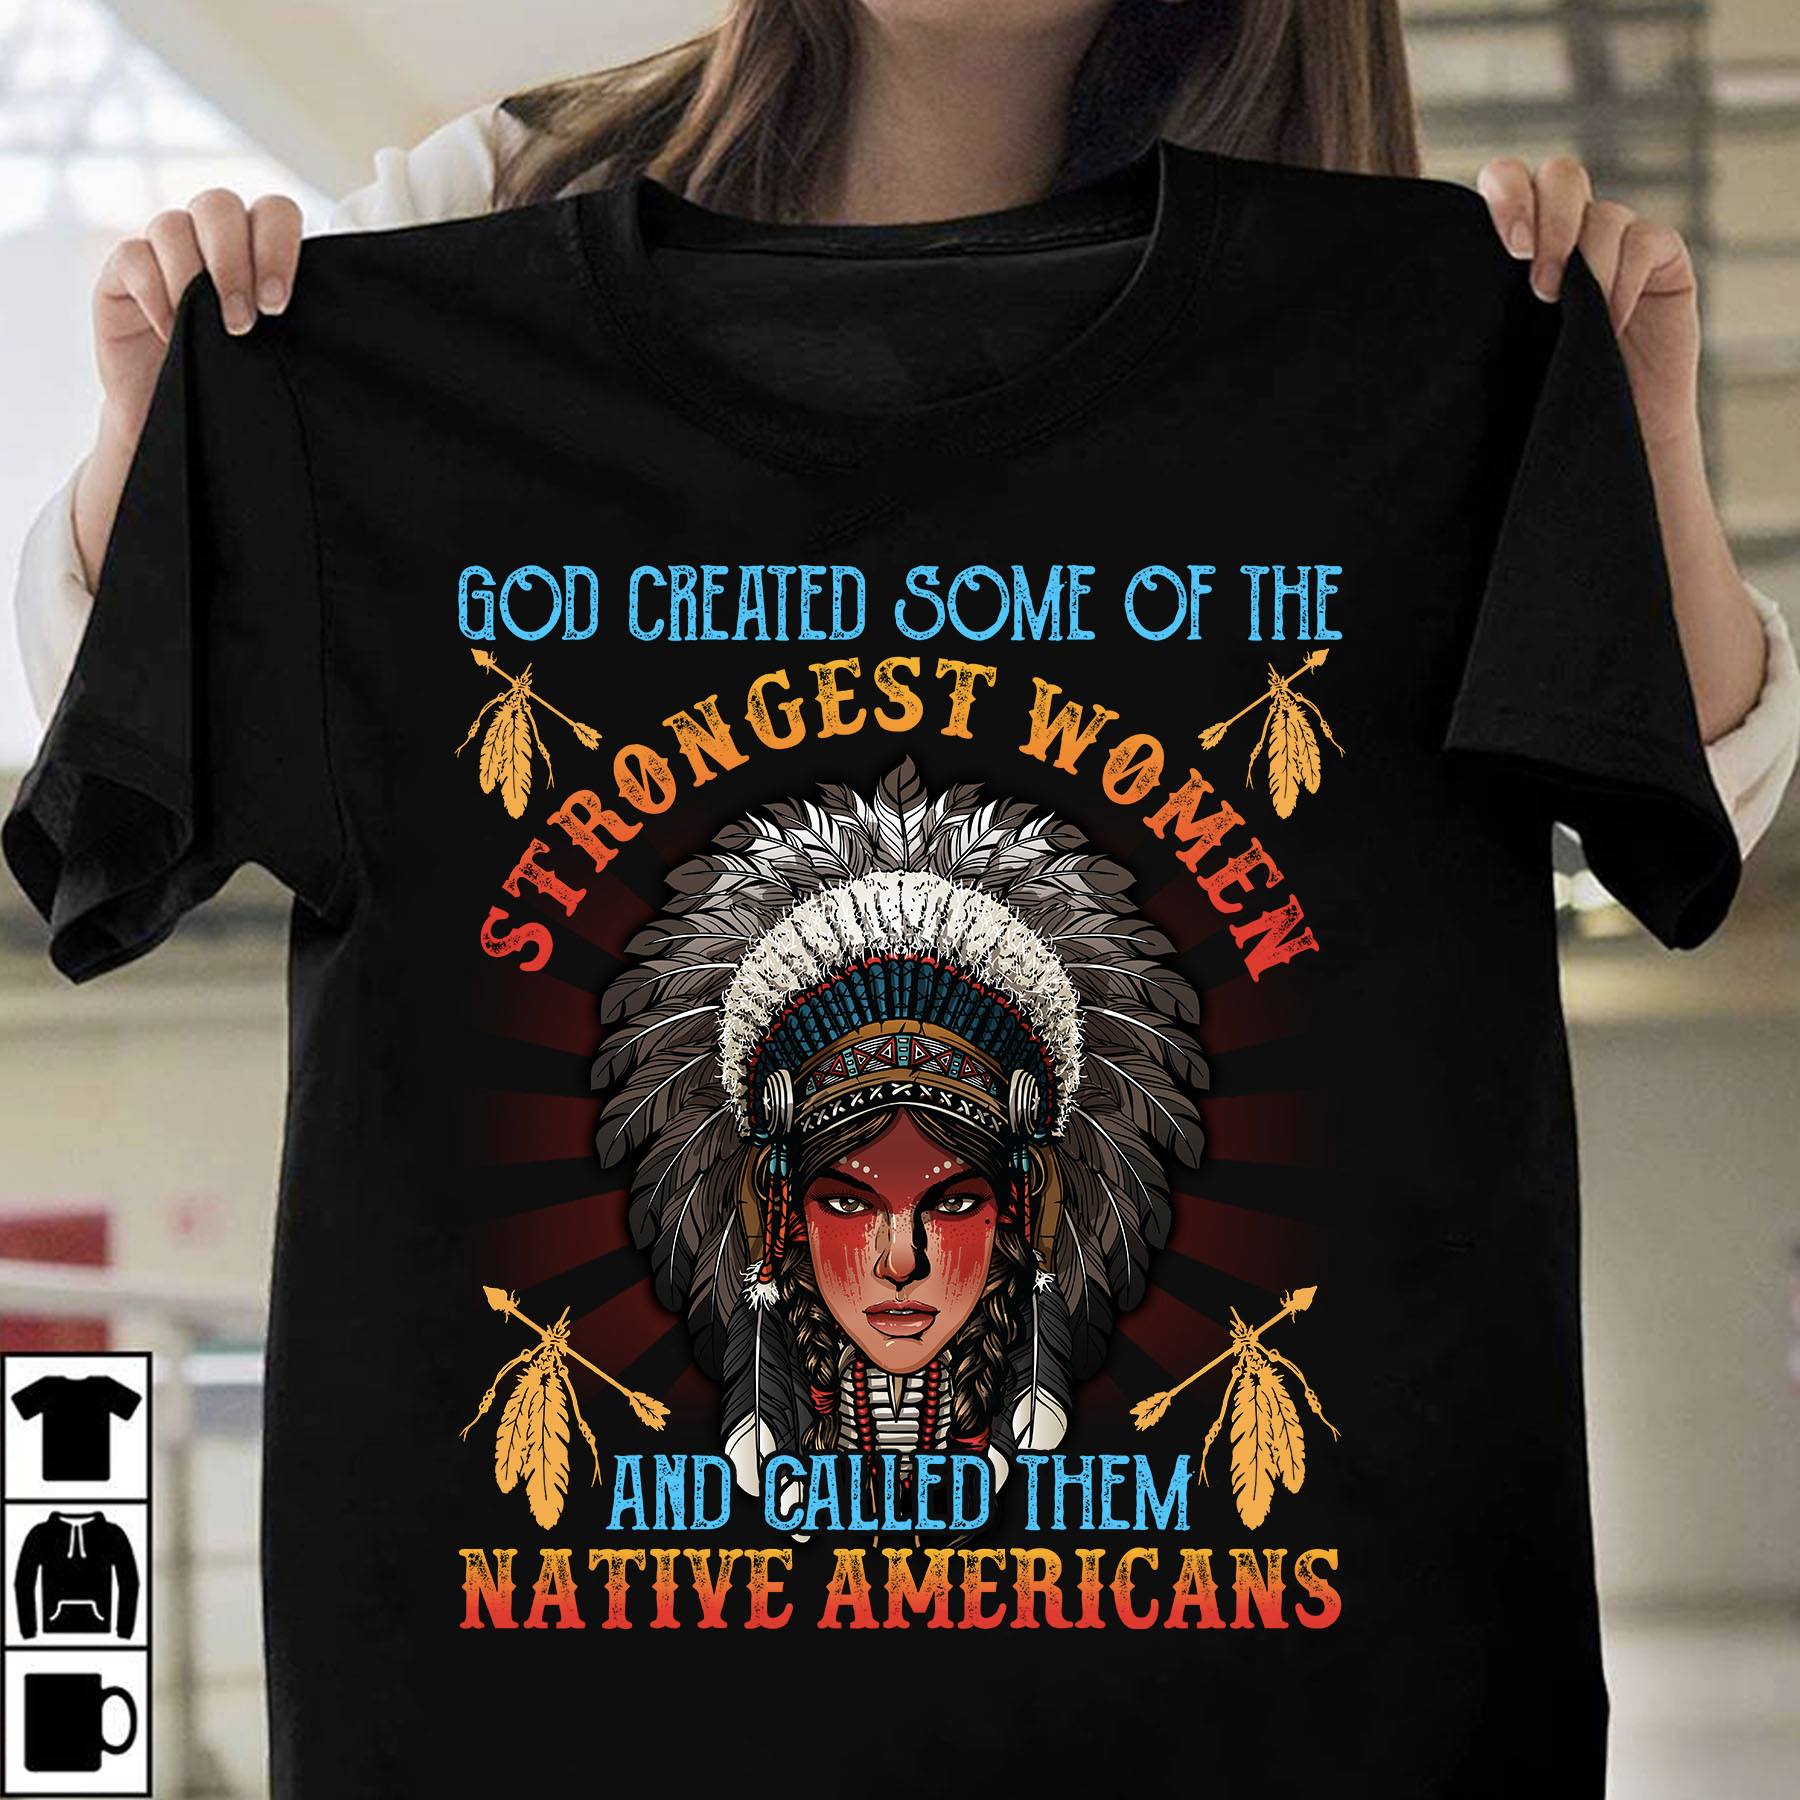 God created some of the strongest women and called them native Americans